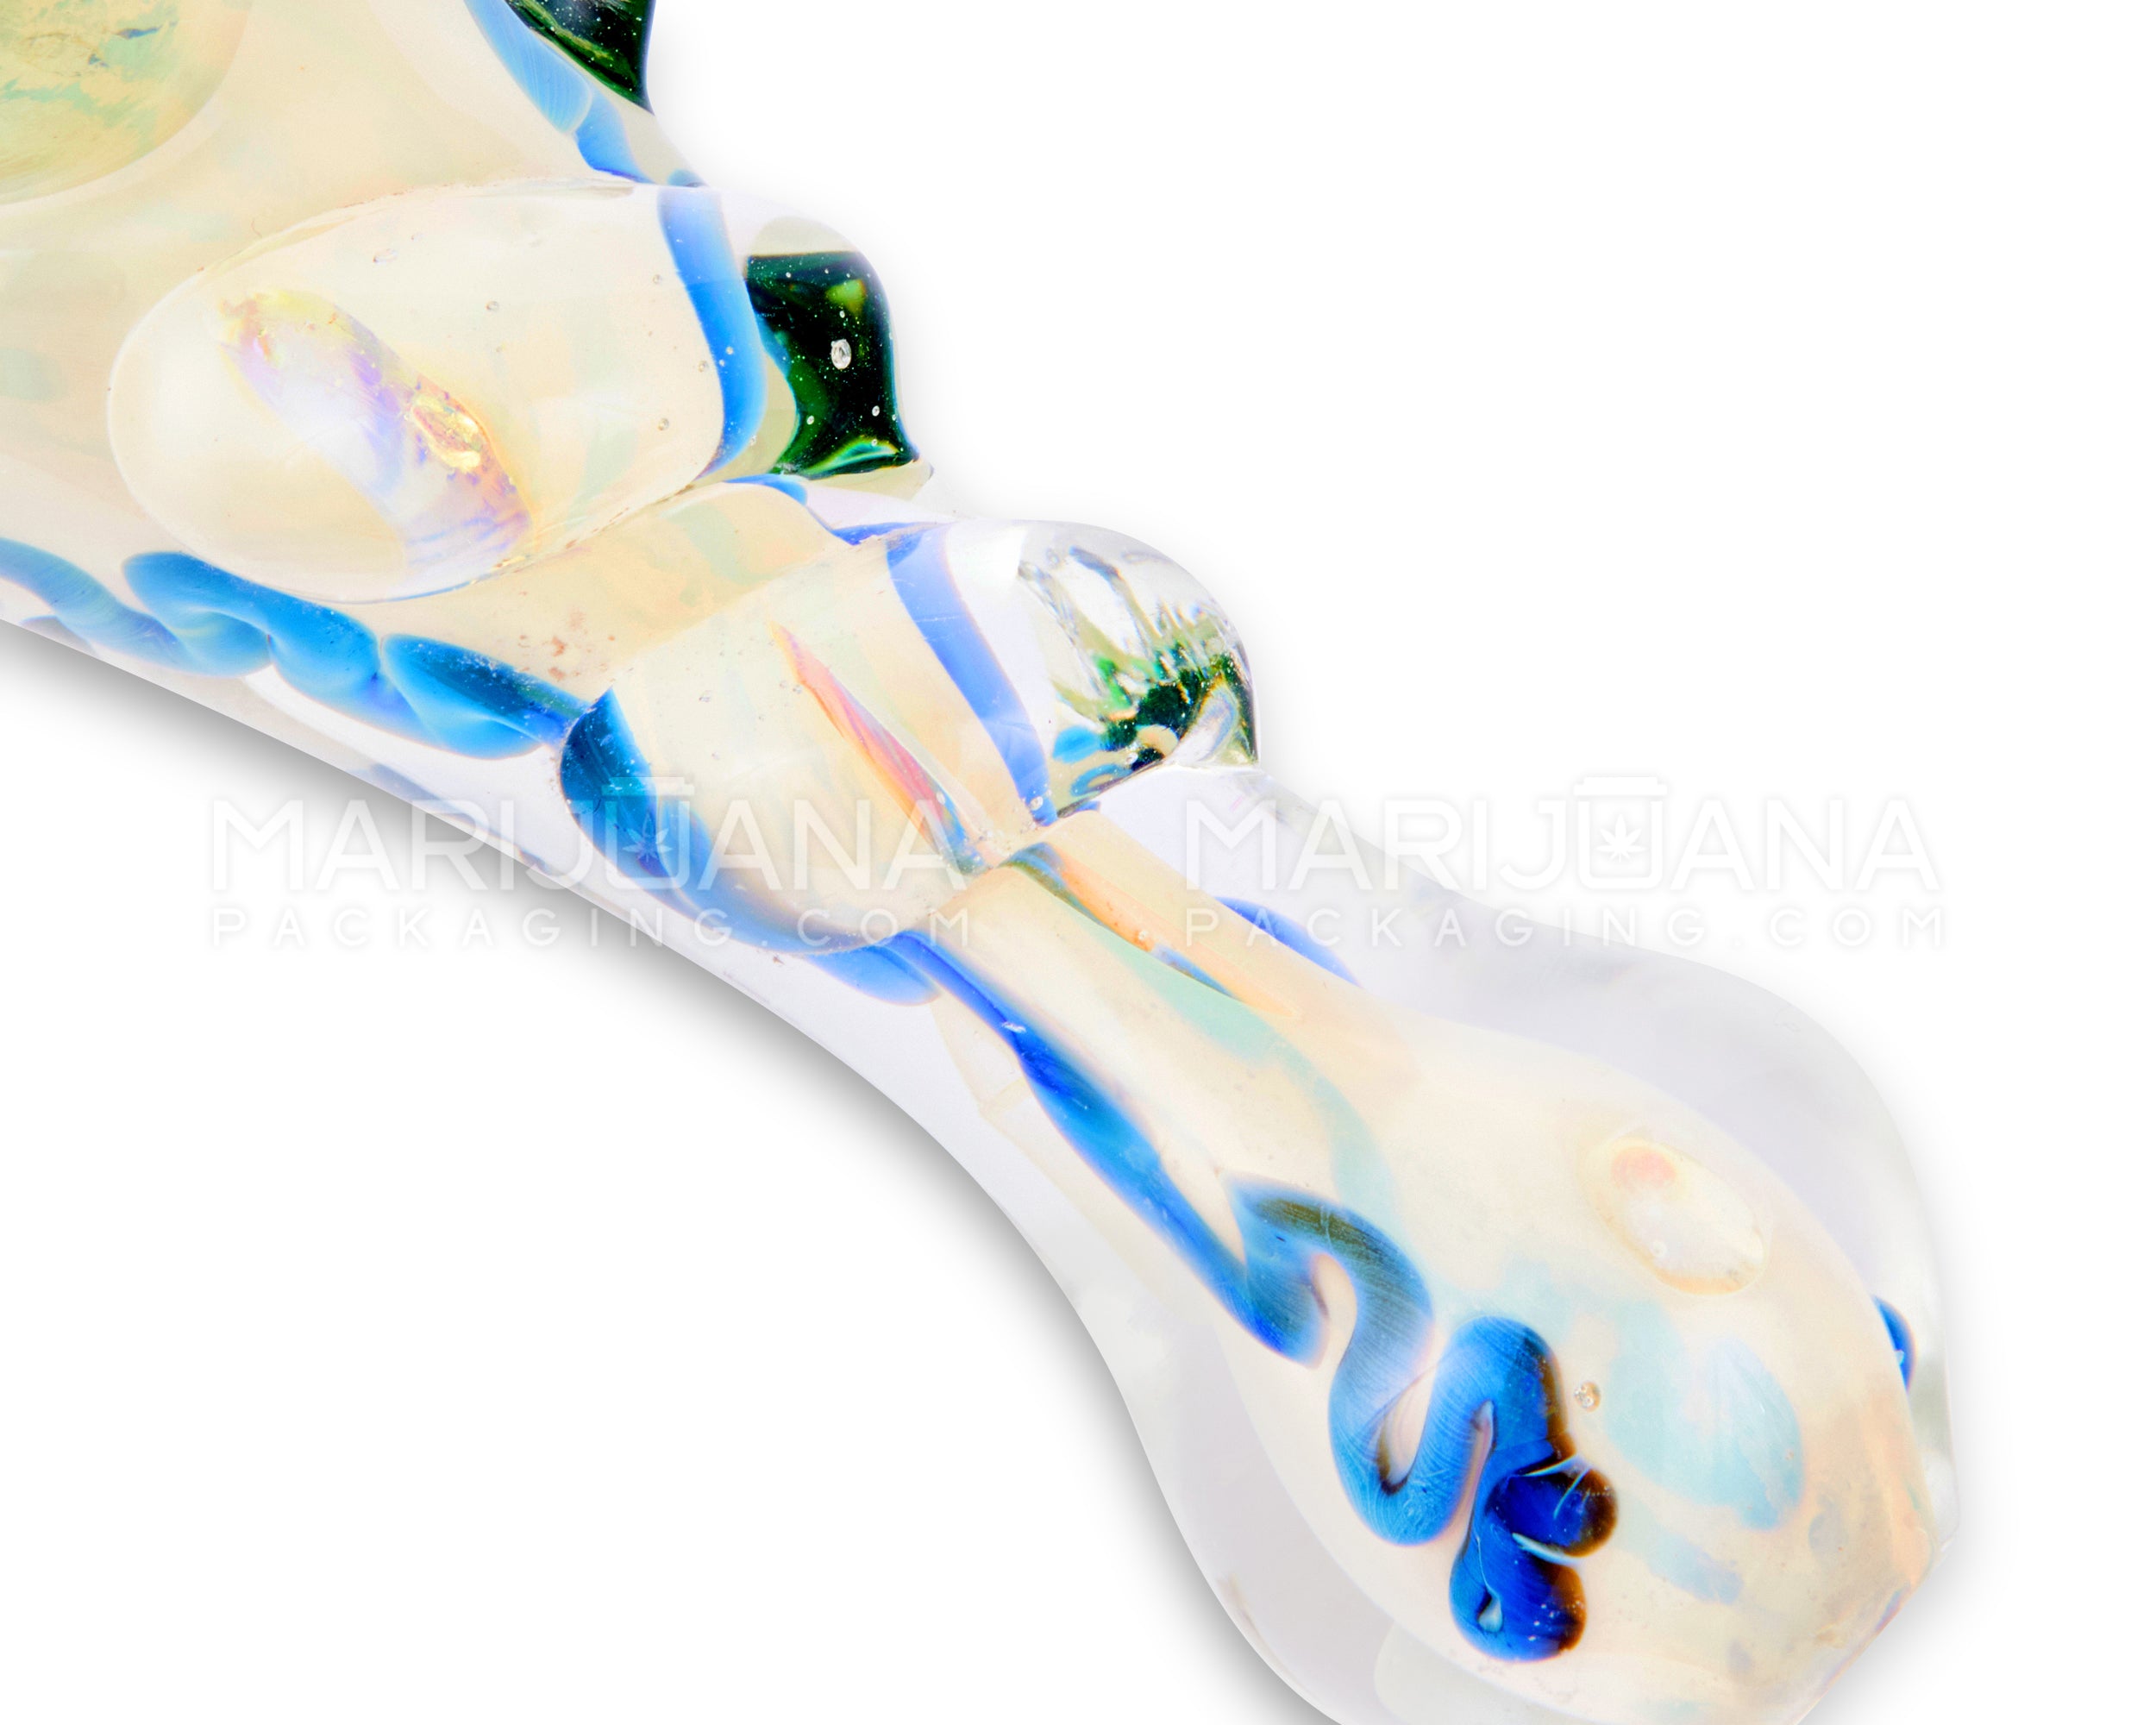 Swirl & Fumed Bulged Spoon Hand Pipe w/ Double Knockers & Spiral Head | 5in Long - Glass - Assorted - 3